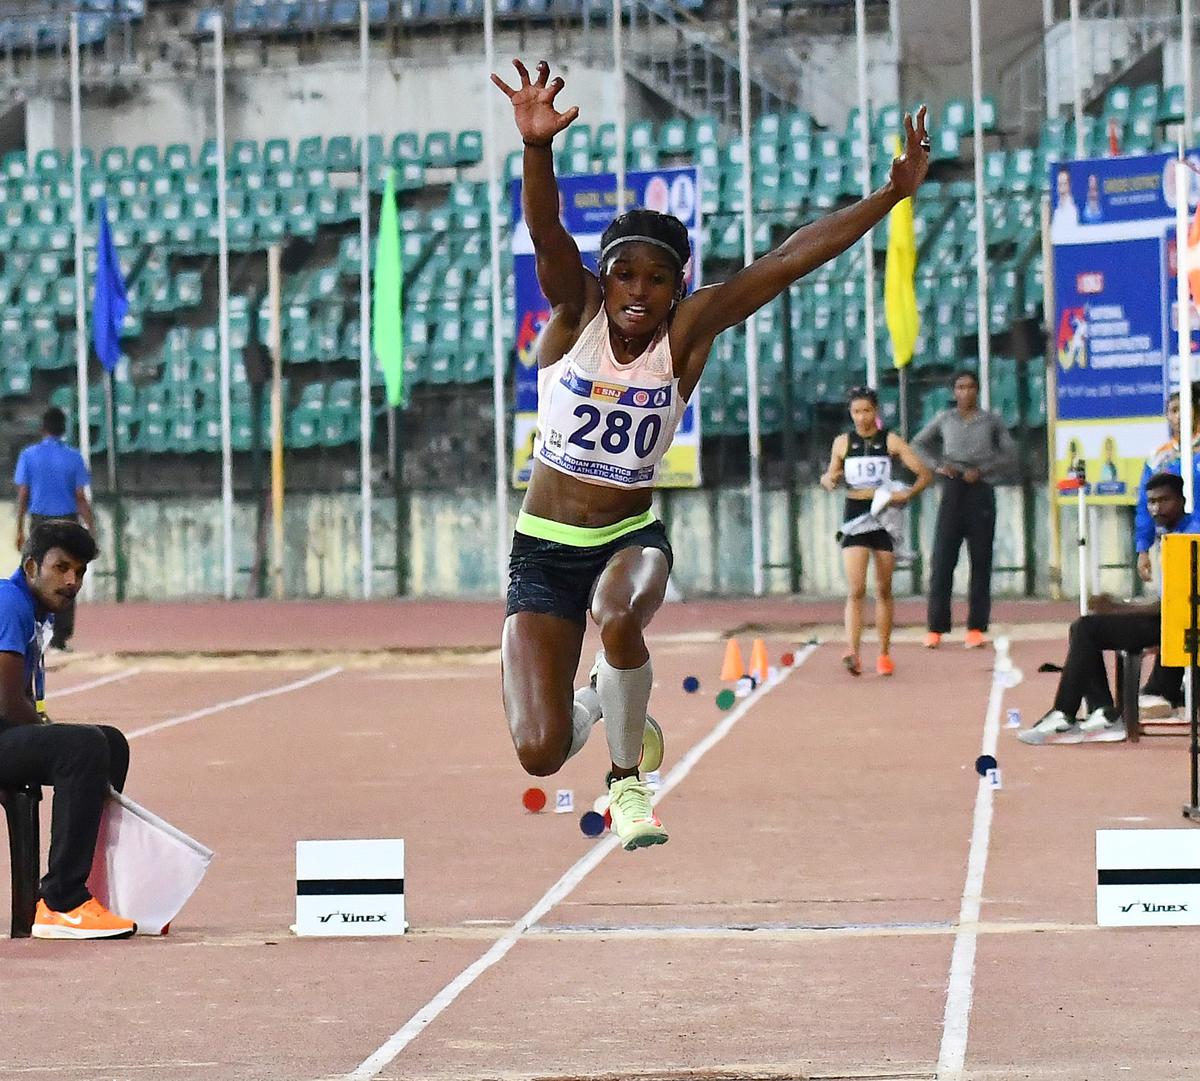 B. Aishwarya, who won the women’s triple jump event, competes during the 61st National Inter-State Senior Athletics Championships in Chennai on June 13, 2022. 